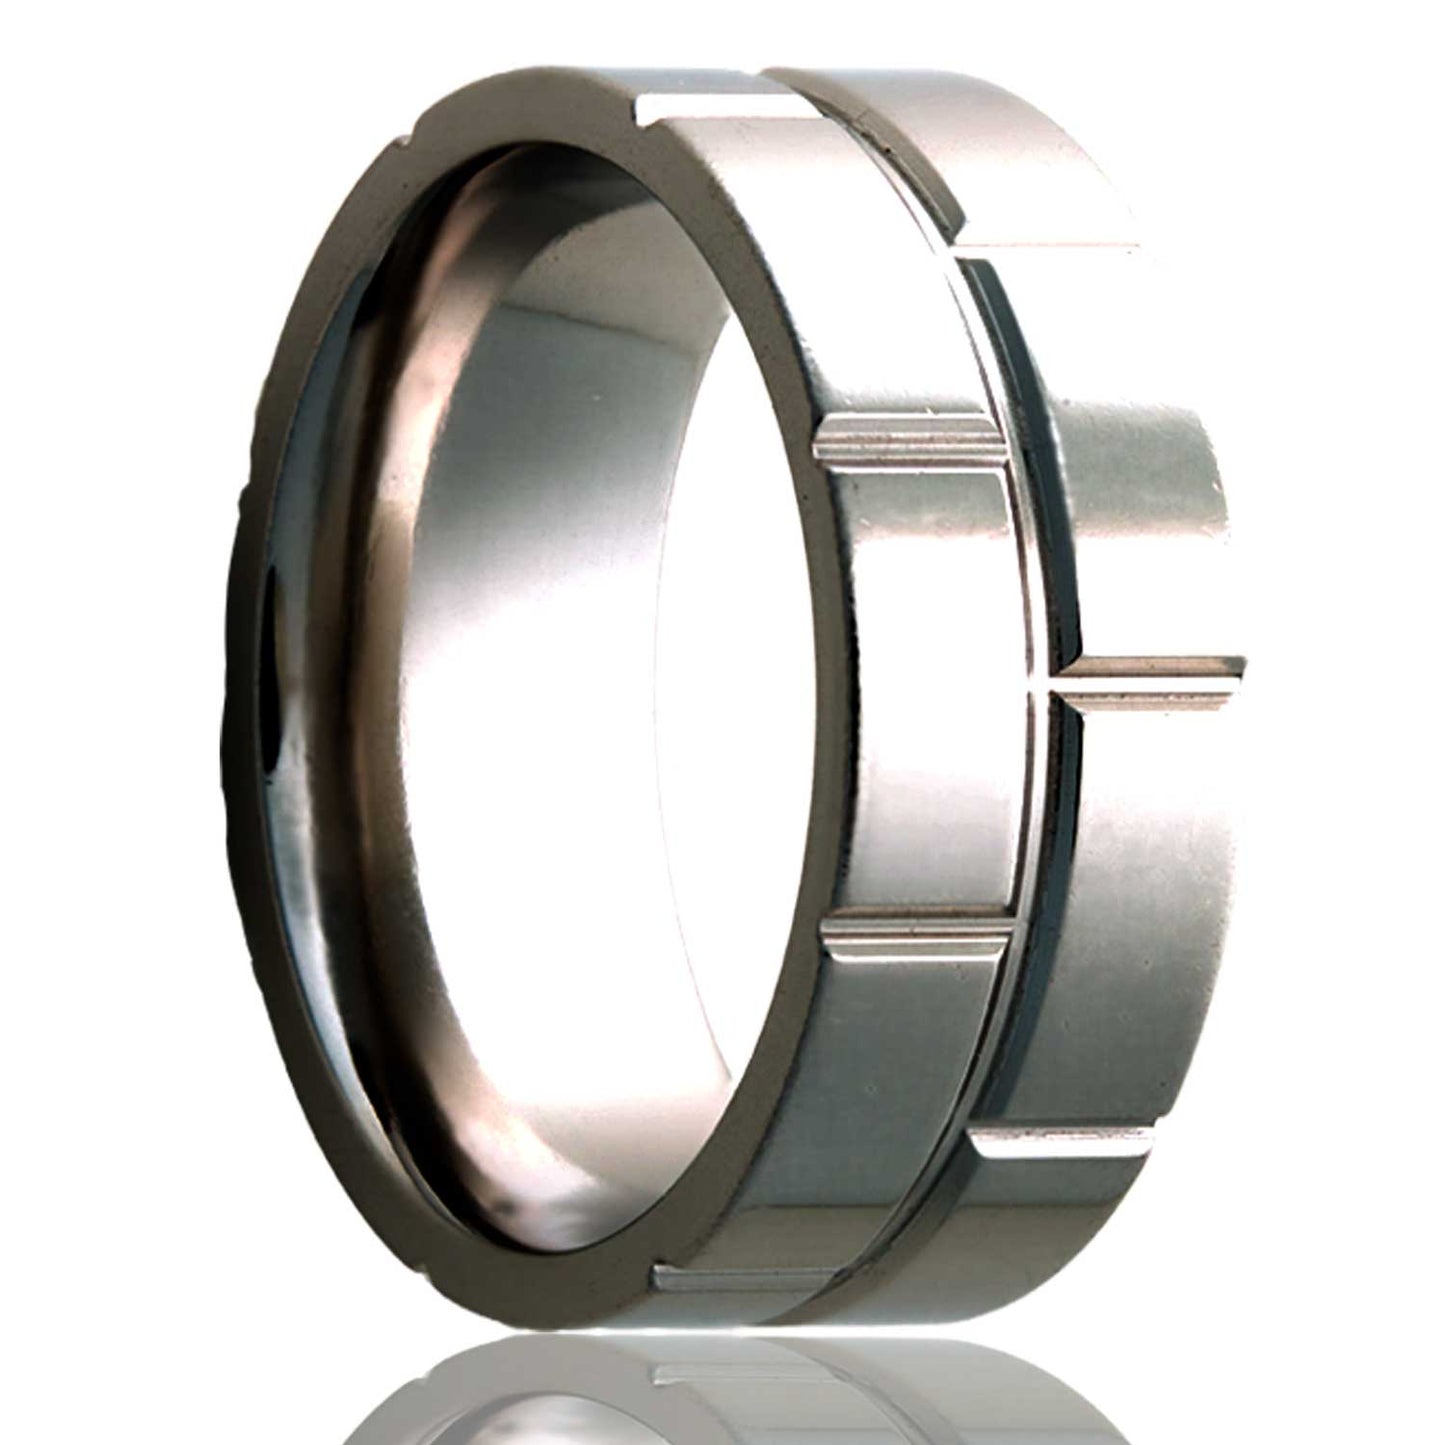 A brick grooved titanium wedding band displayed on a neutral white background.